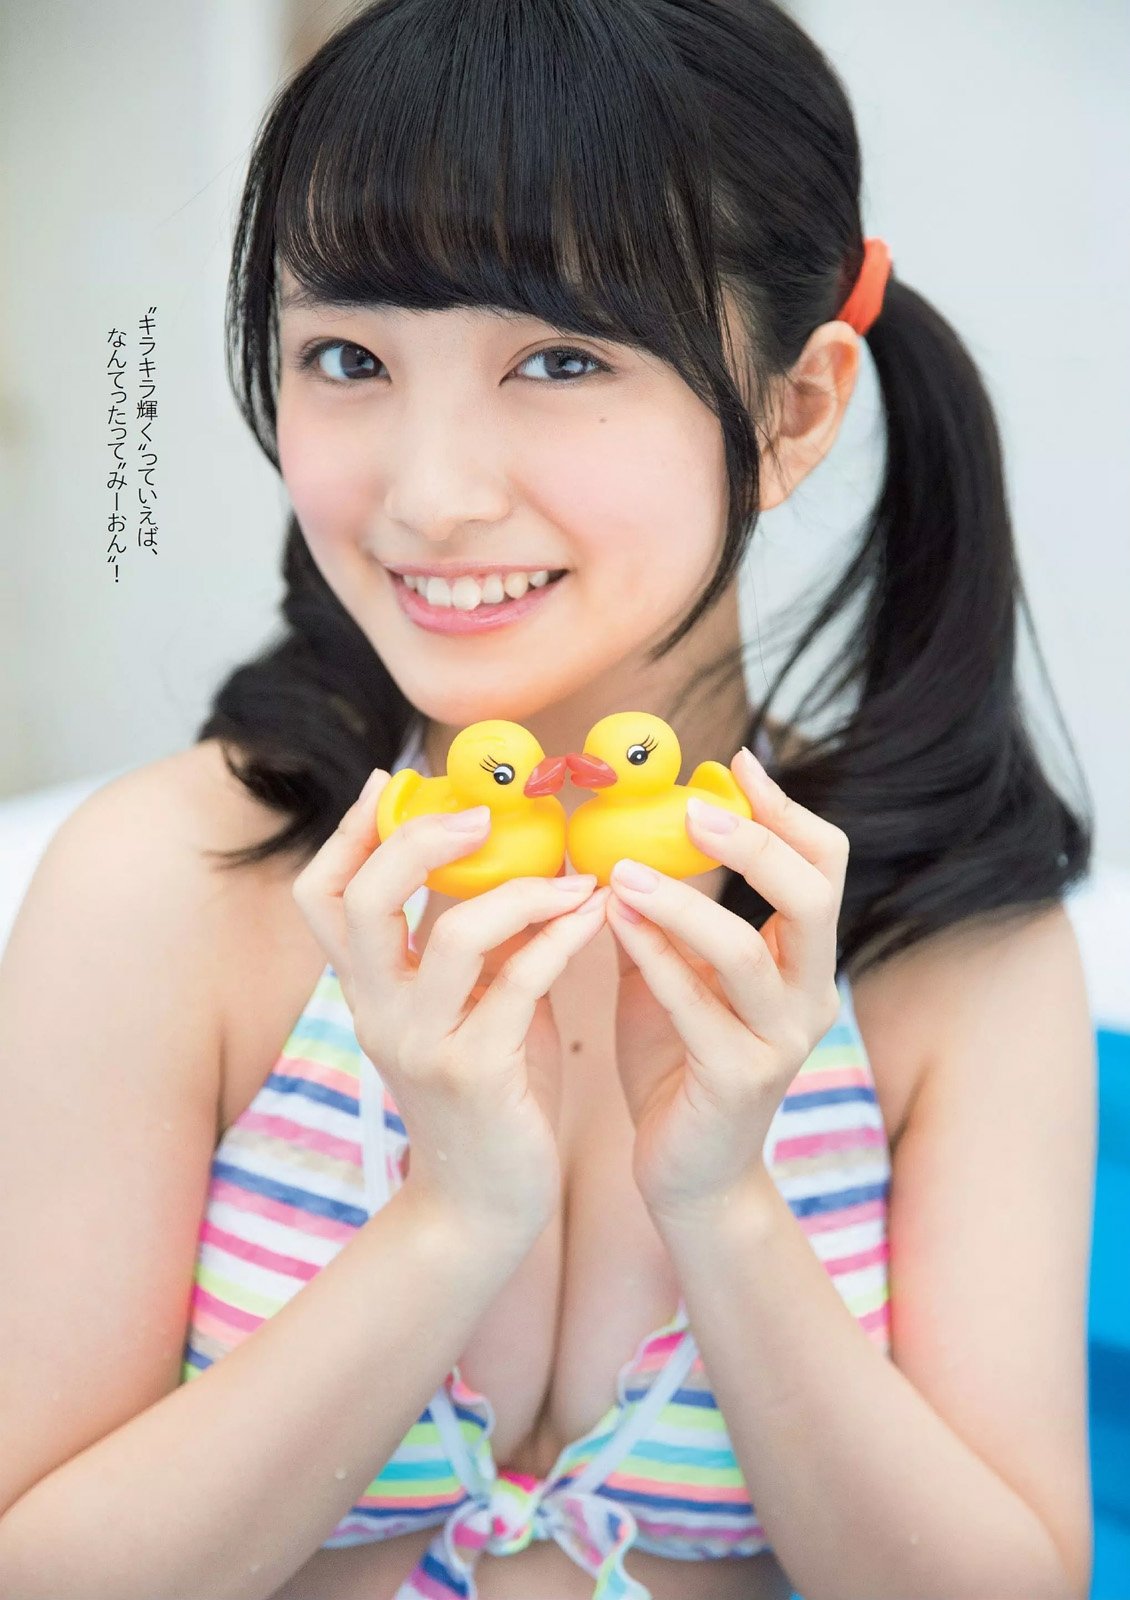 Mukaichi Mion Pure Lovely Picture and Photo